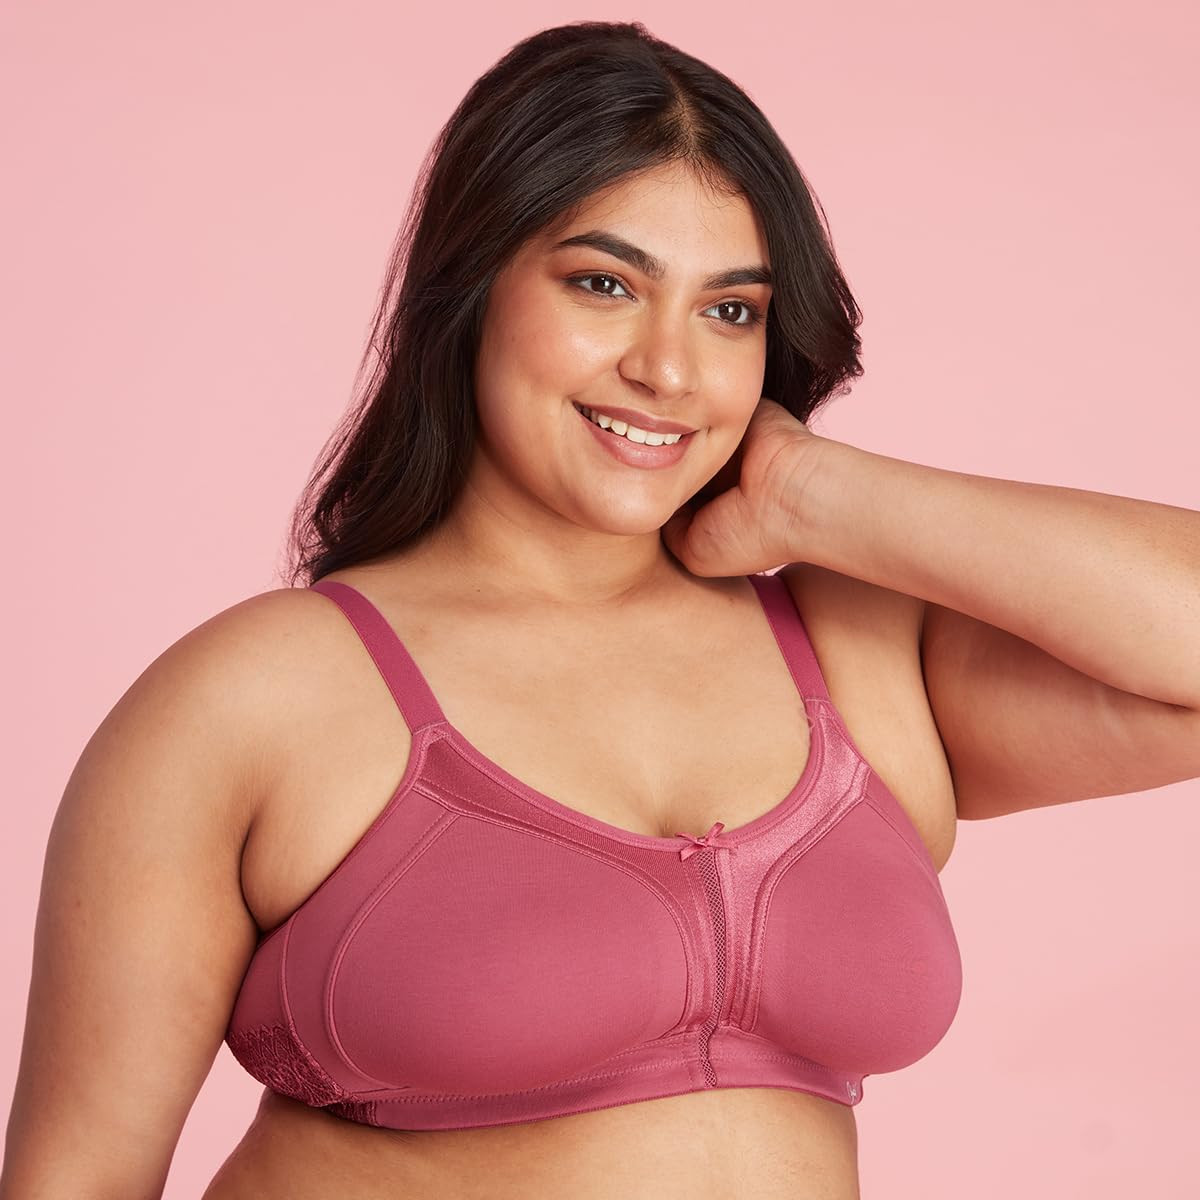 https://www.fastemi.com/uploads/fastemicom/products/nykd-by-nykaa-womens-full-support-m-frame-heavy-bust-everyday-cotton-bra--non-padded--wireless--full-coverage-minimizer-bra-nyb101-pink-36c-1nsize-36c-240748865636874_l.jpg